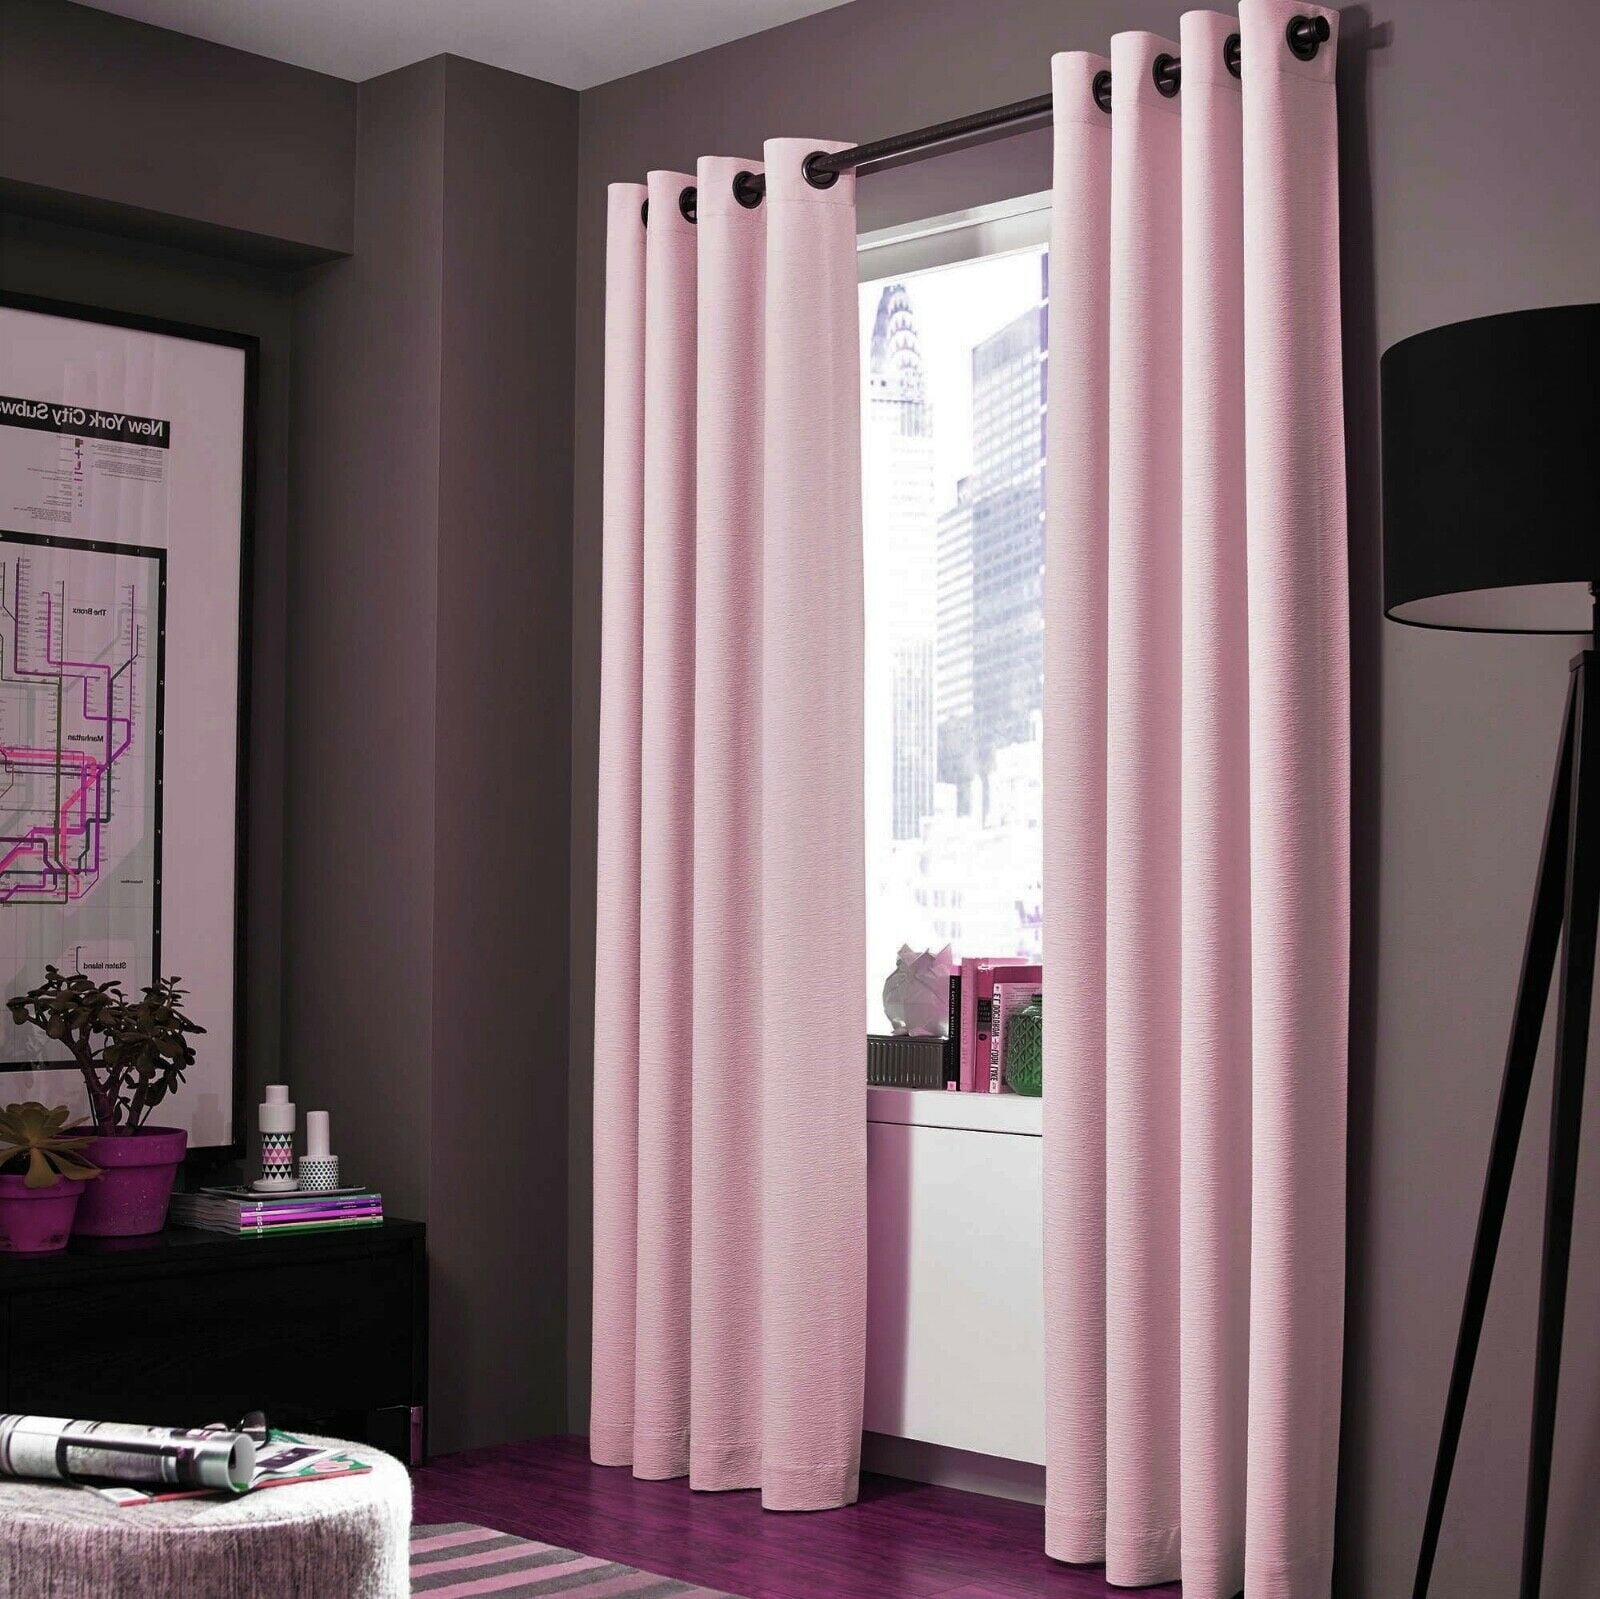 2PC HEAVY THICK SOLID GROMMET PANEL WINDOW CURTAIN DRAPES BLACKOUT FLOCKING K34 